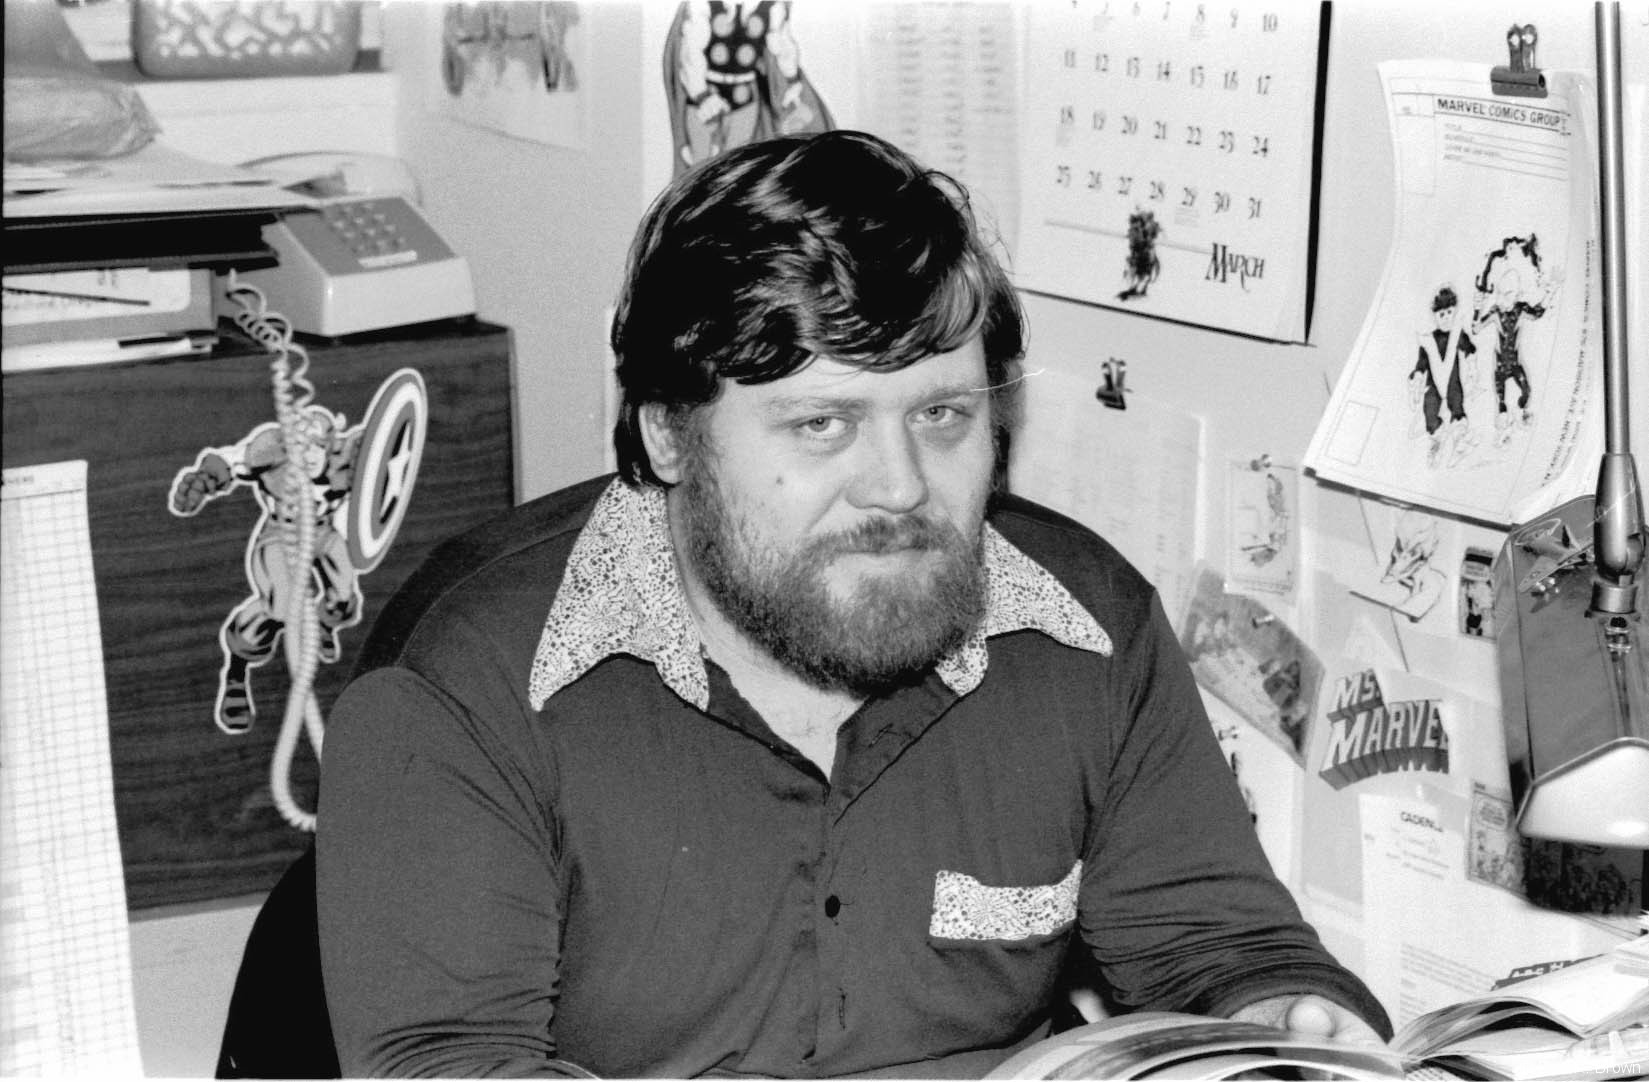 Dave Cockrum, penciler, inker. He was the on-staff art correction person. Truly one of the nicest guys in the business.